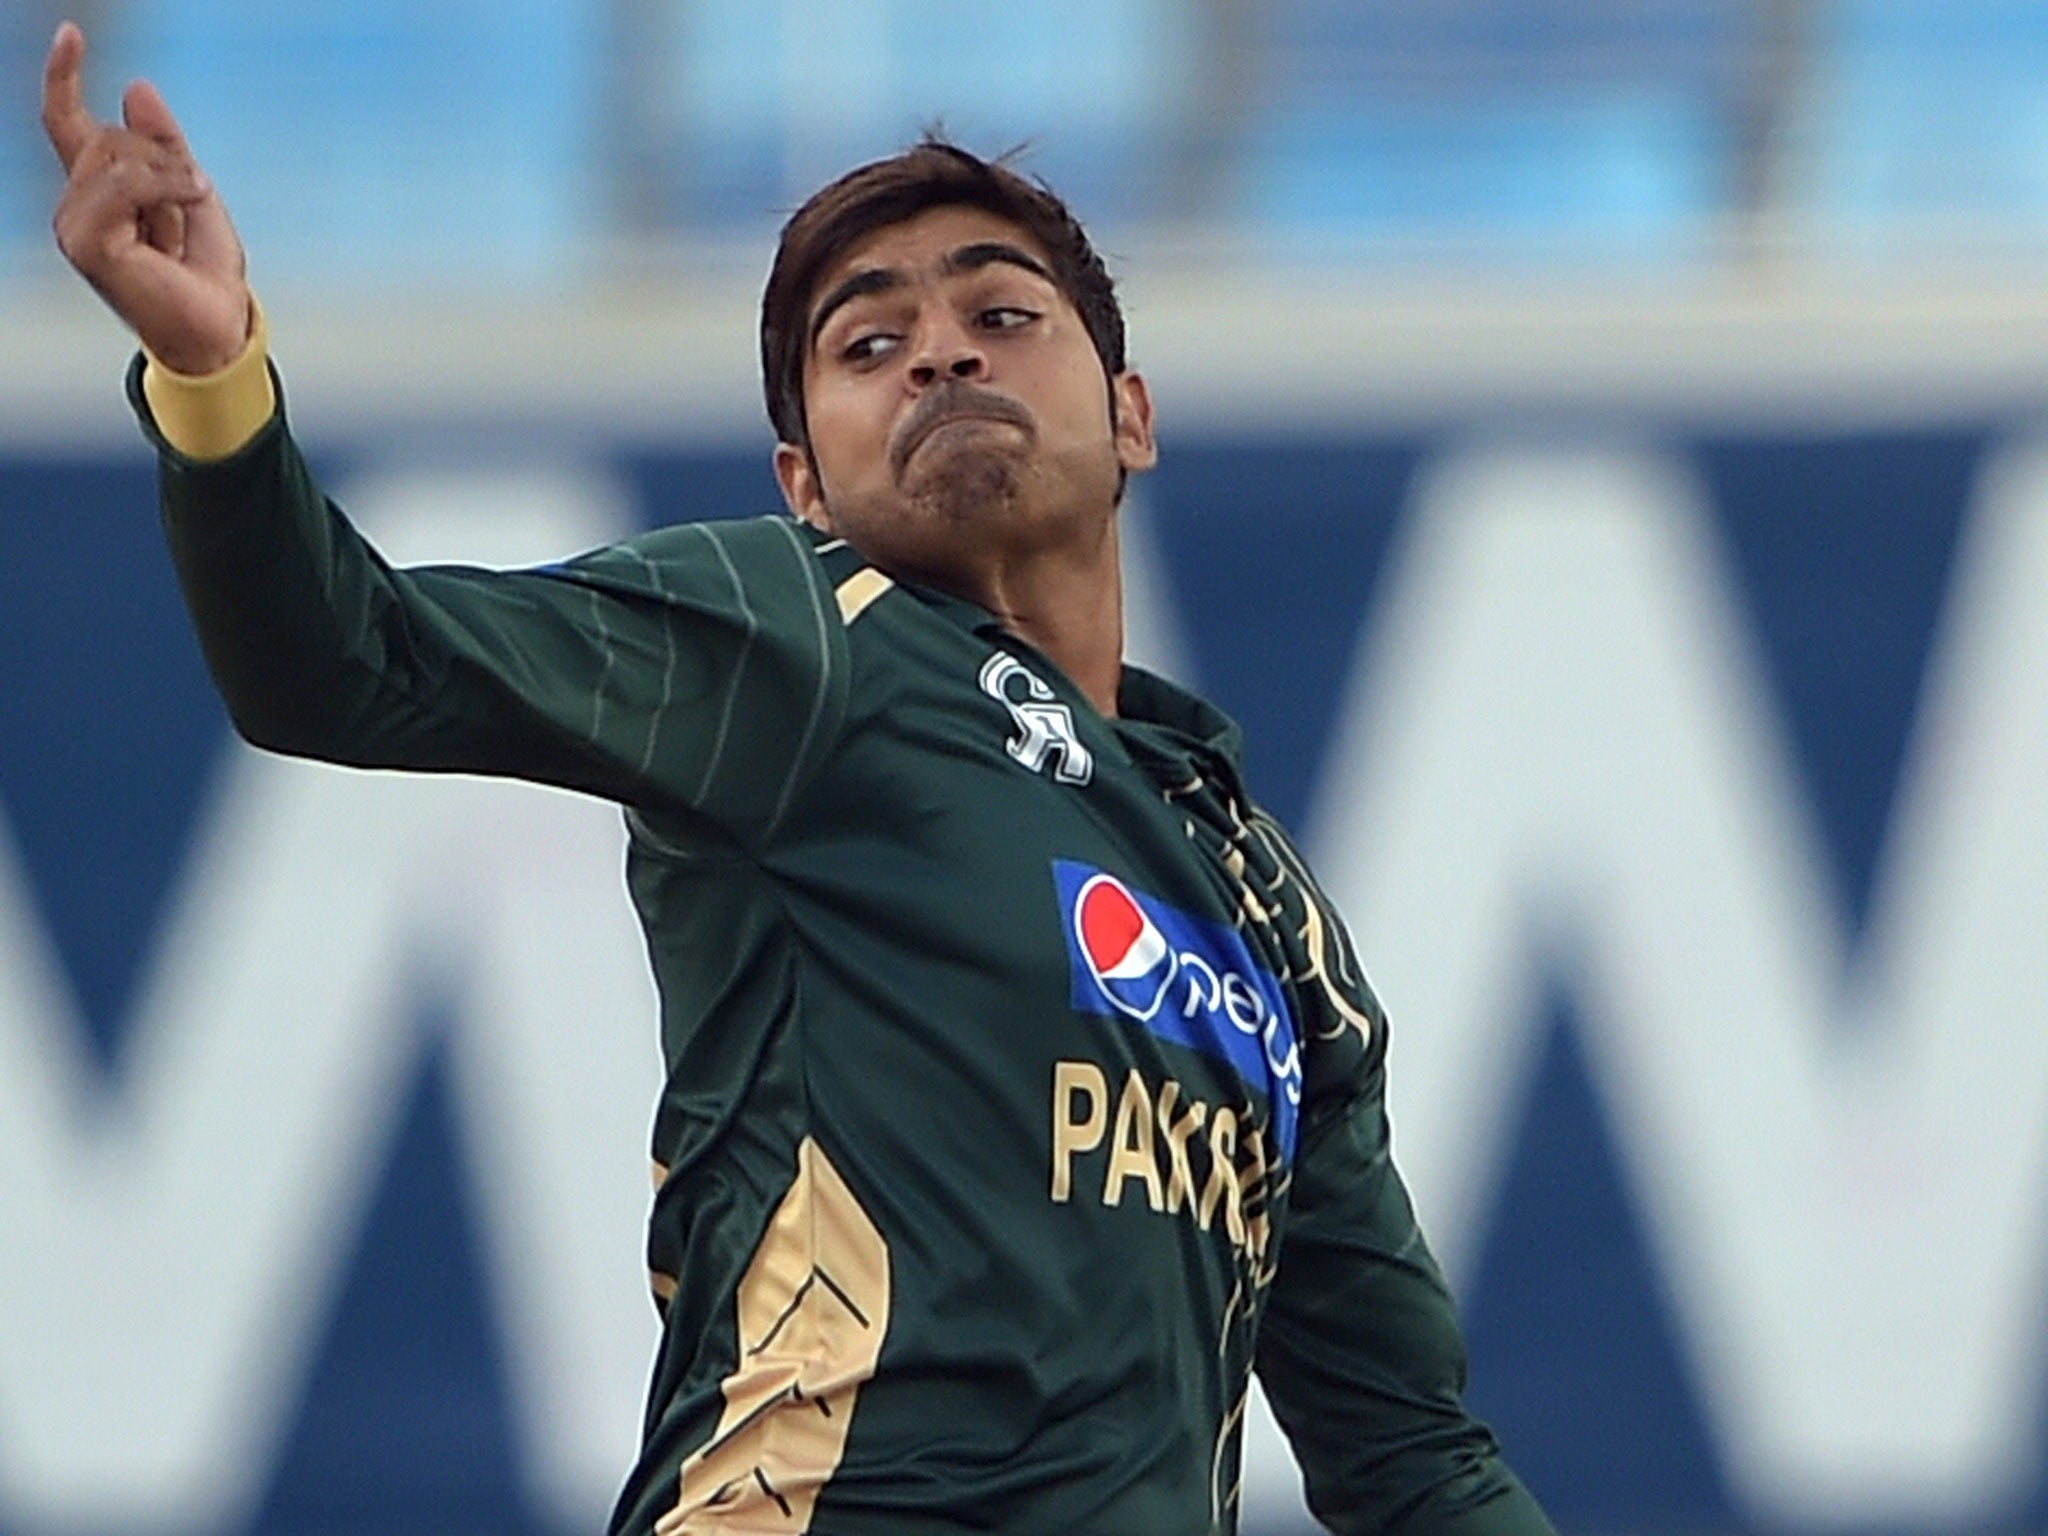 Pakistan all-rounder Haris Sohail claims to have been woken up by a ghost